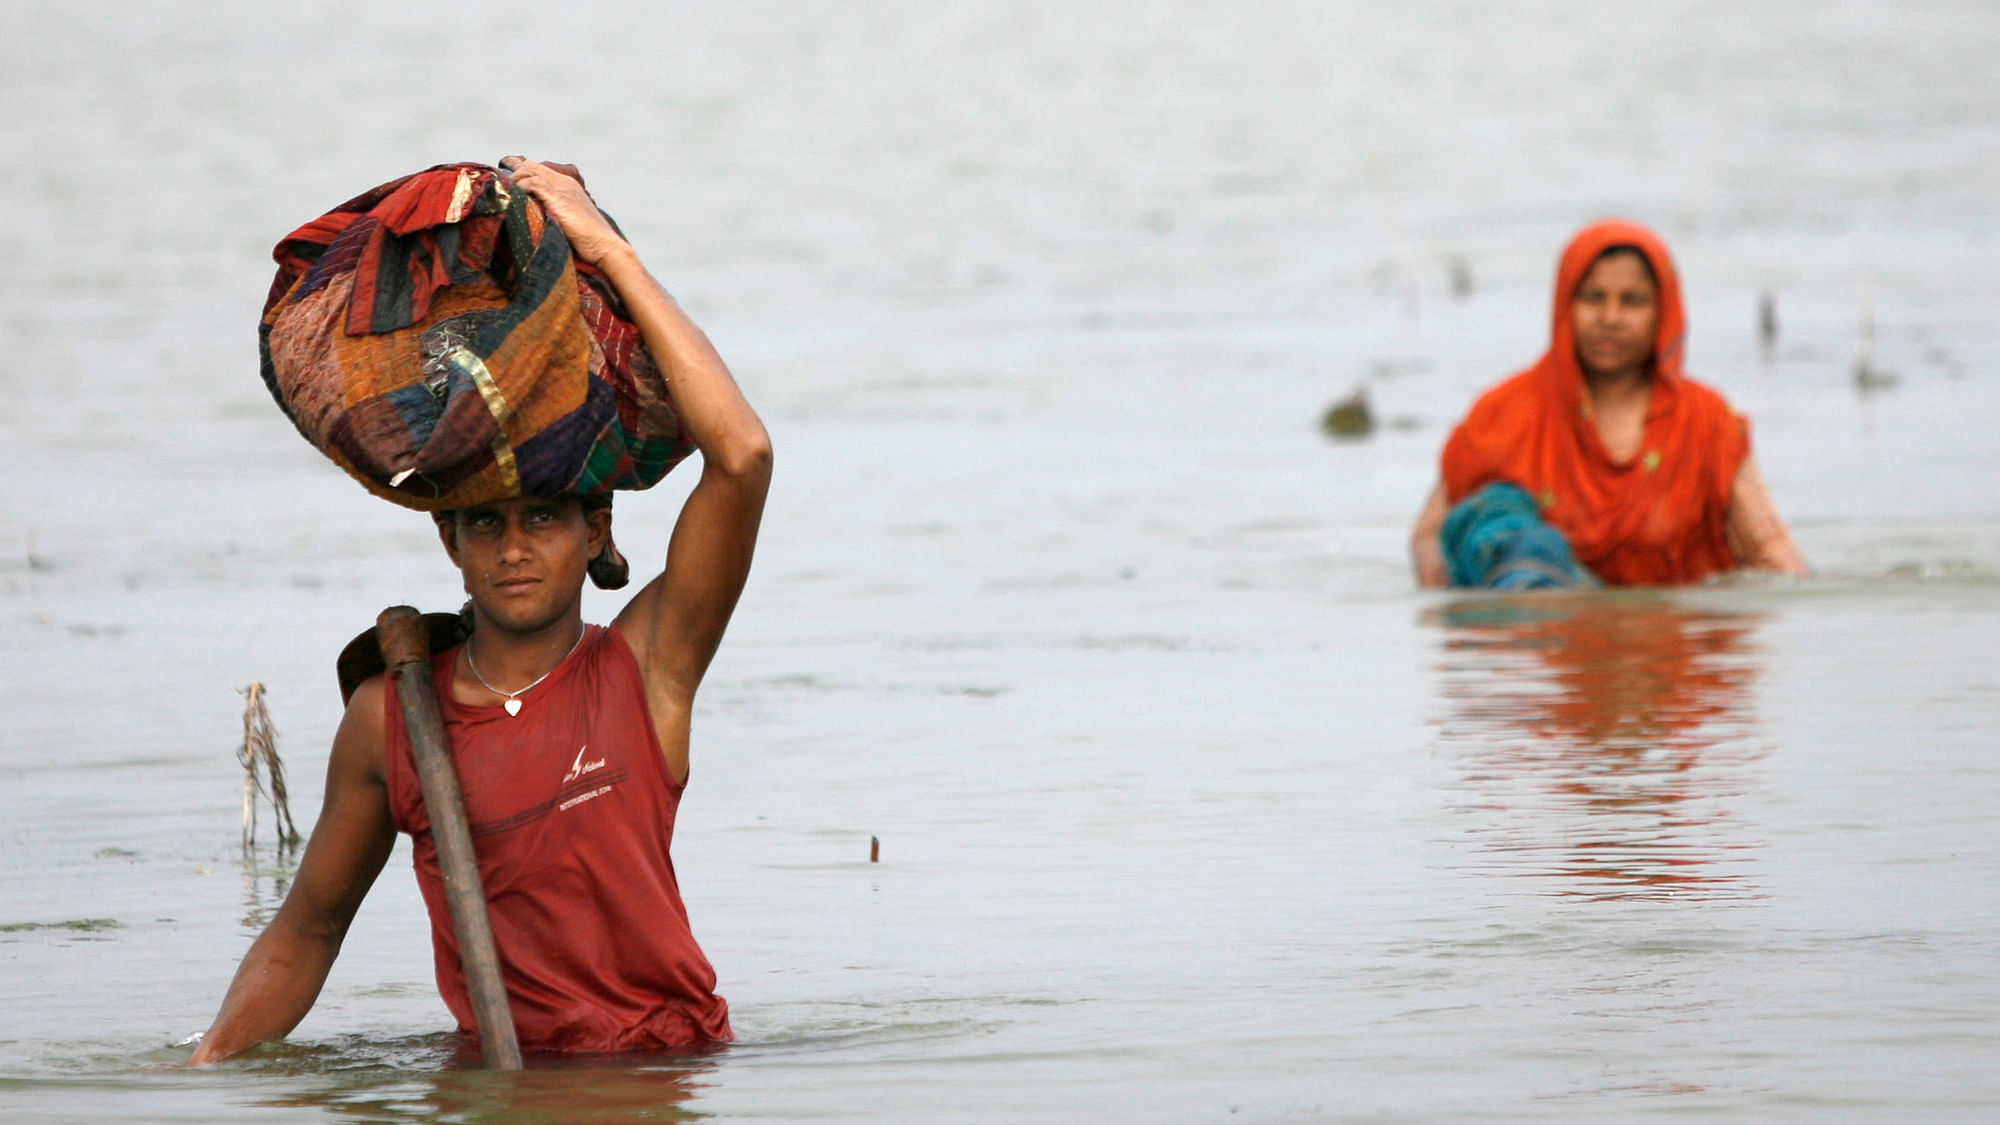 People carry their belongings through  floods caused by cyclone Aila in Shatkhira June 4, 2009. Thousands were displaced by a huge tidal wave caused by the storm. (Photo: Andrew Biraj/Reuters)